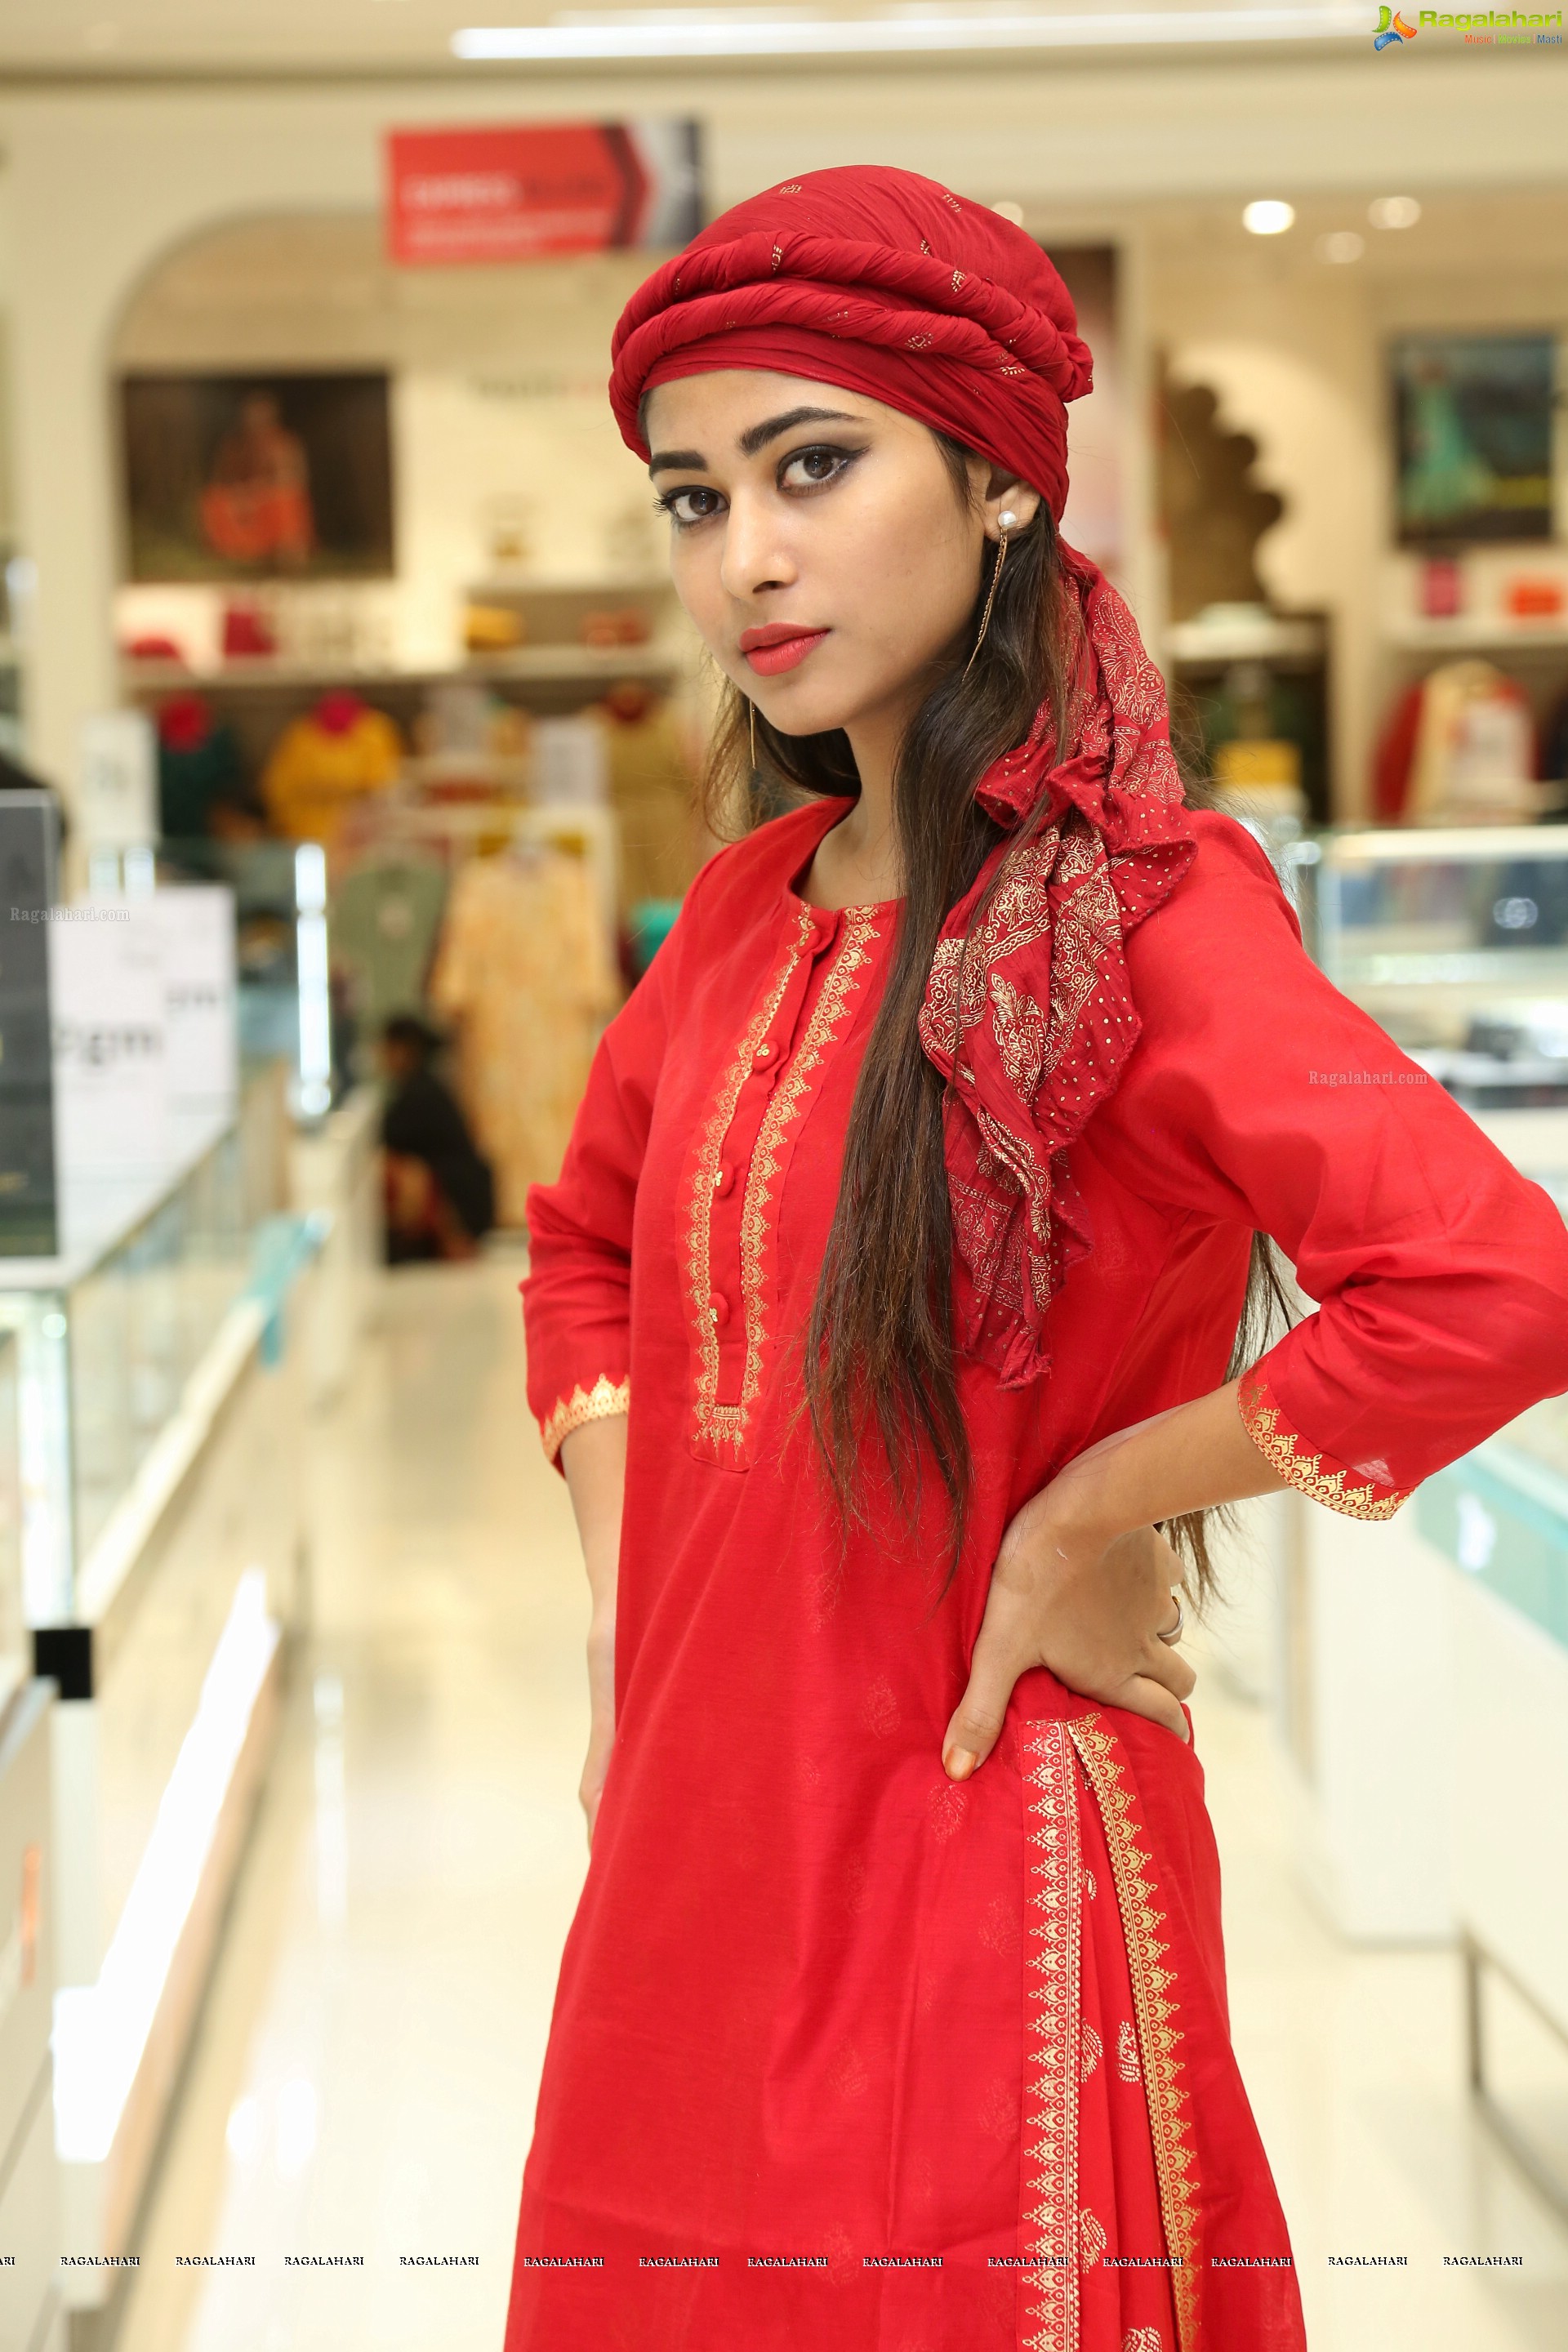 Soni Taghu @ Shoppers Stop Fashion Show - HD Gallery